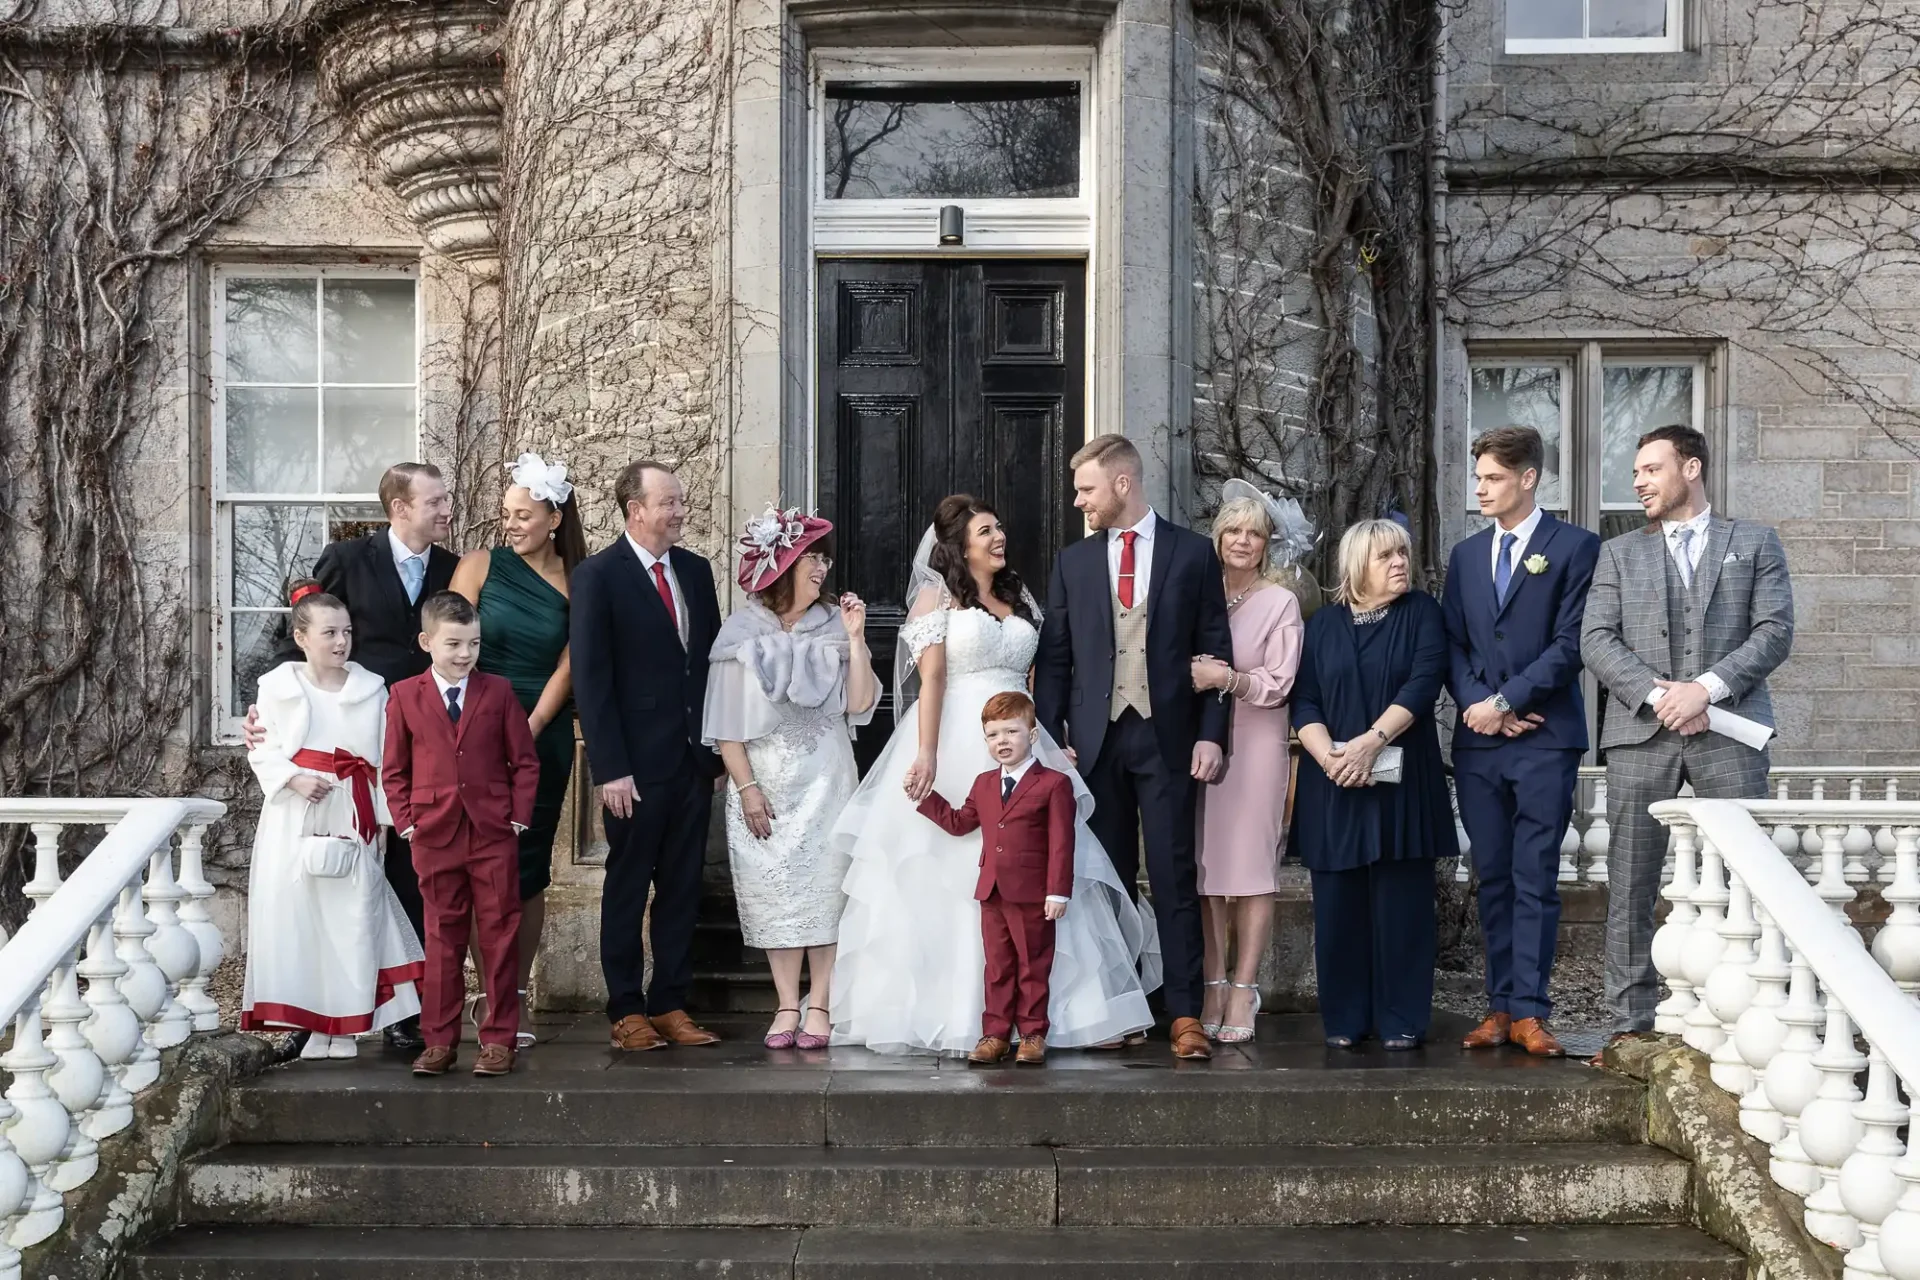 A large family gathers on steps outside a stone building, dressed formally for a wedding with smiles and varied interactions.